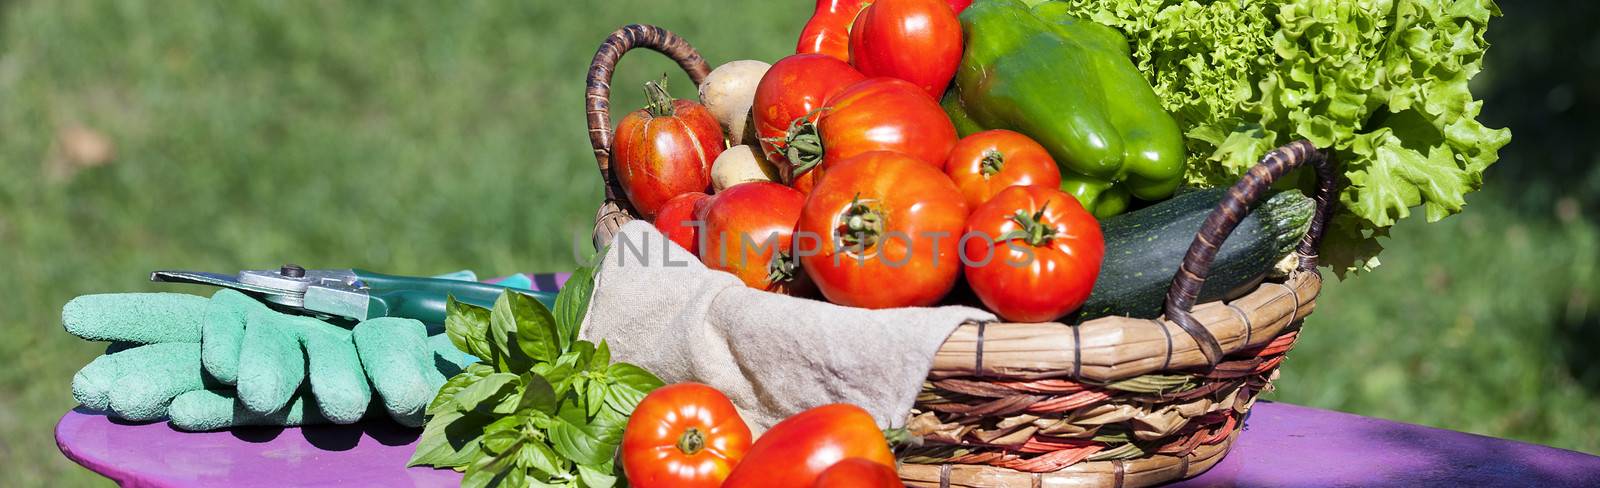 Some vegetables in a basket, panoramic view